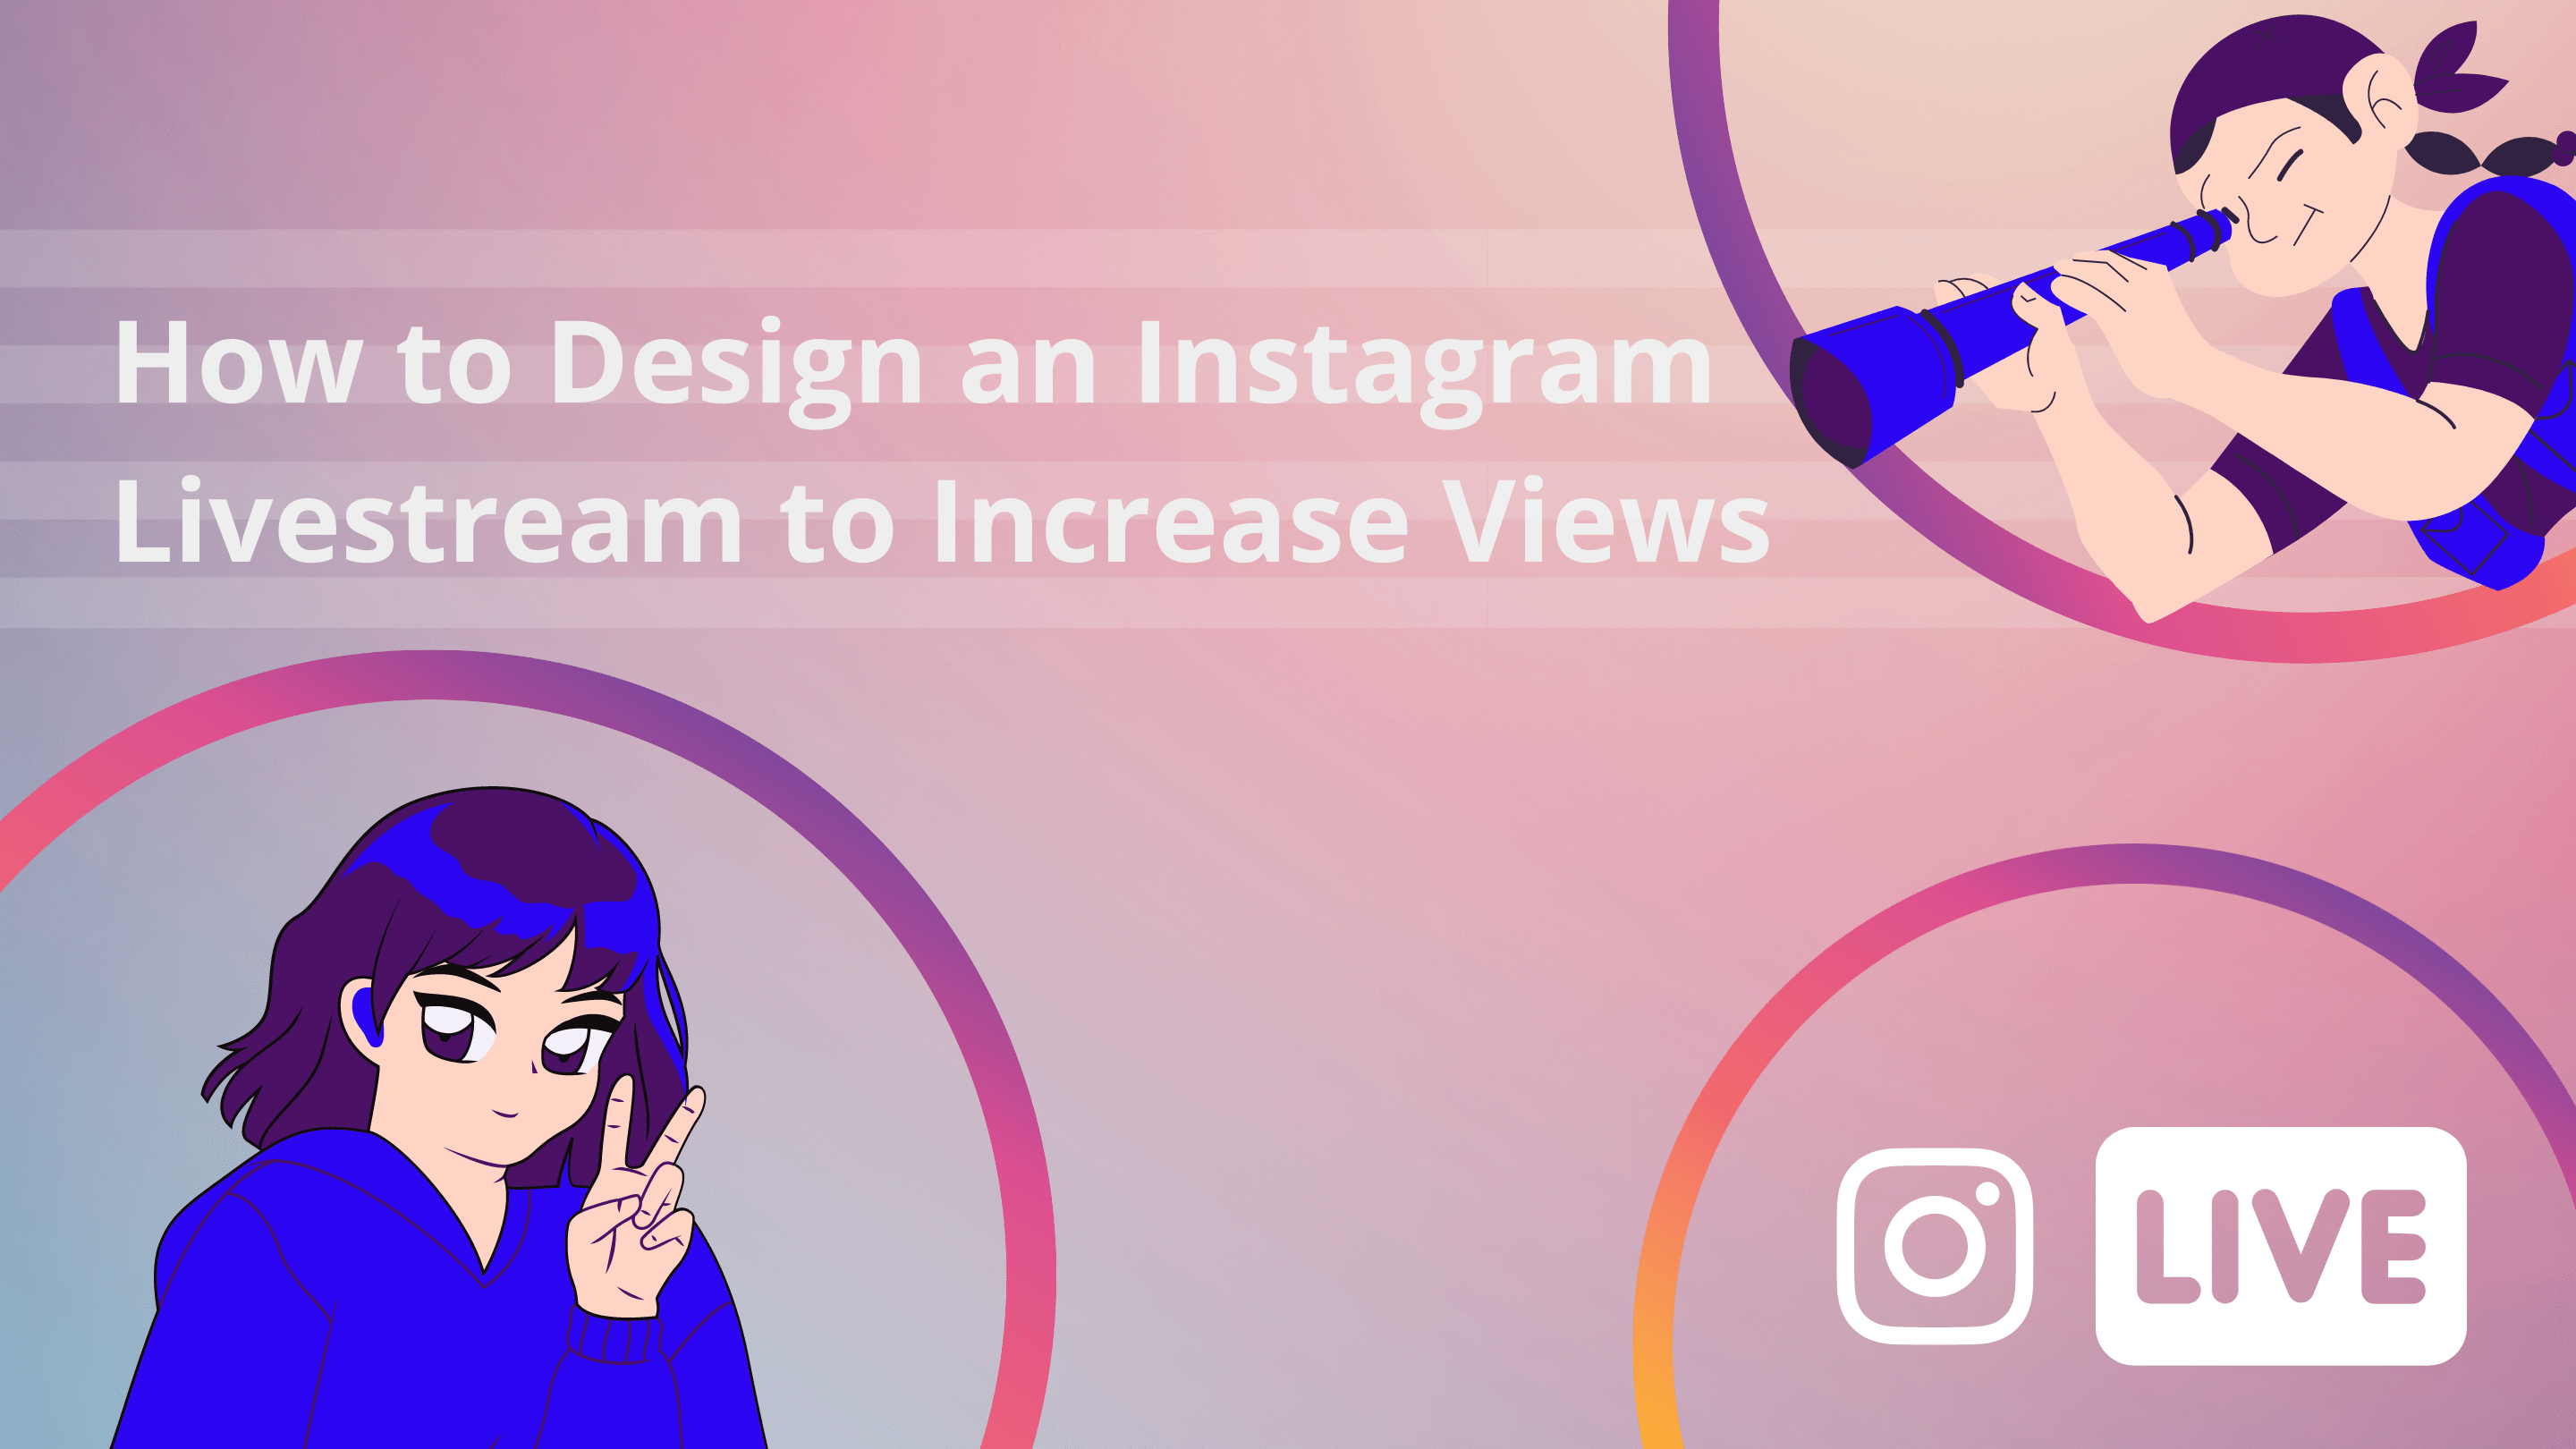 How to Design an Instagram Livestream to Increase Views Greatly